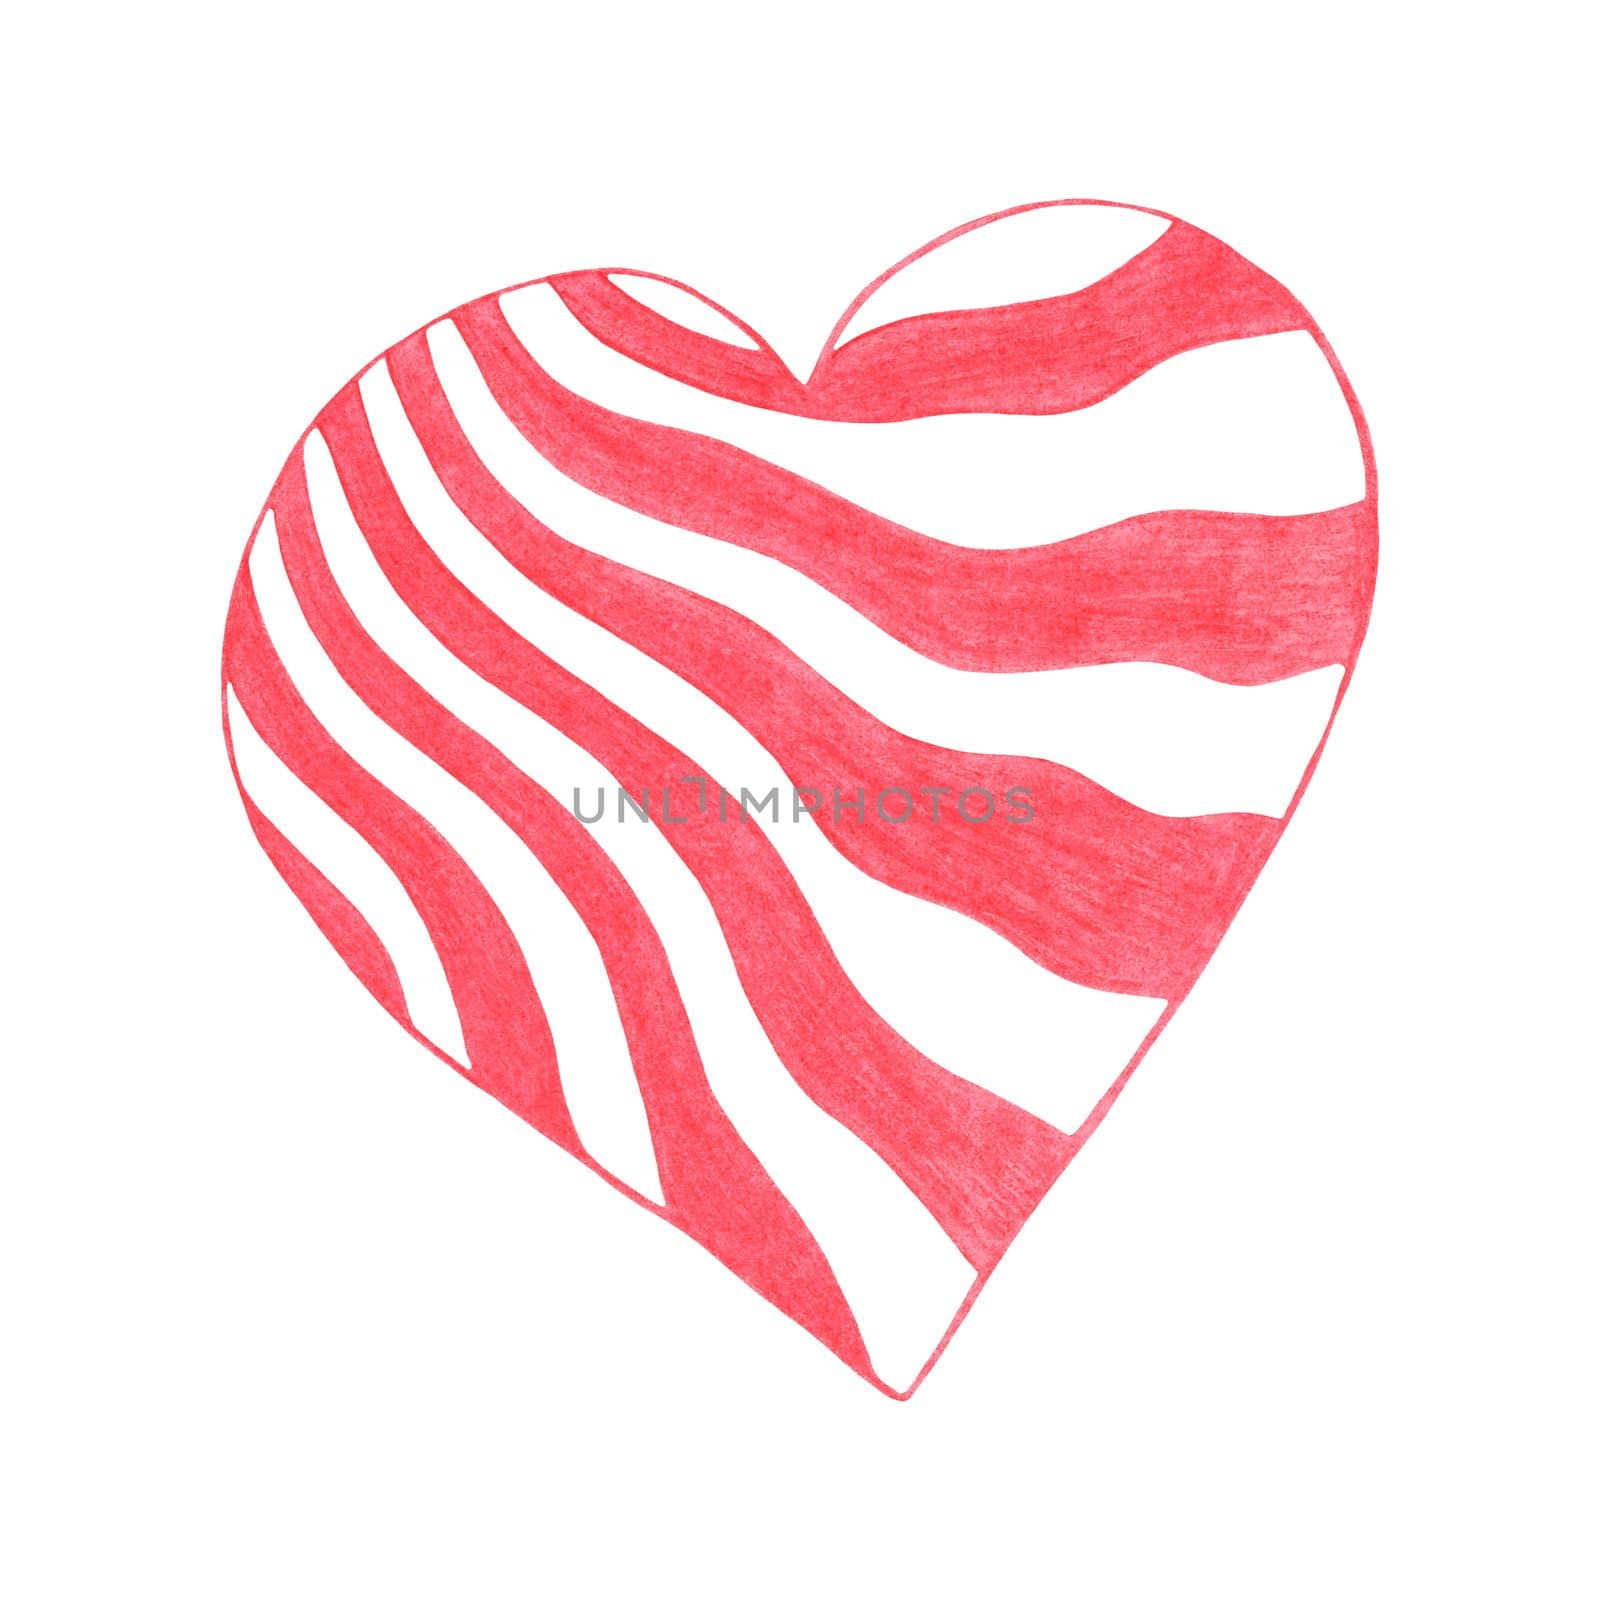 Red Heart Drawn by Colored Pencil. Heart Shape Isolated on White Background. by Rina_Dozornaya